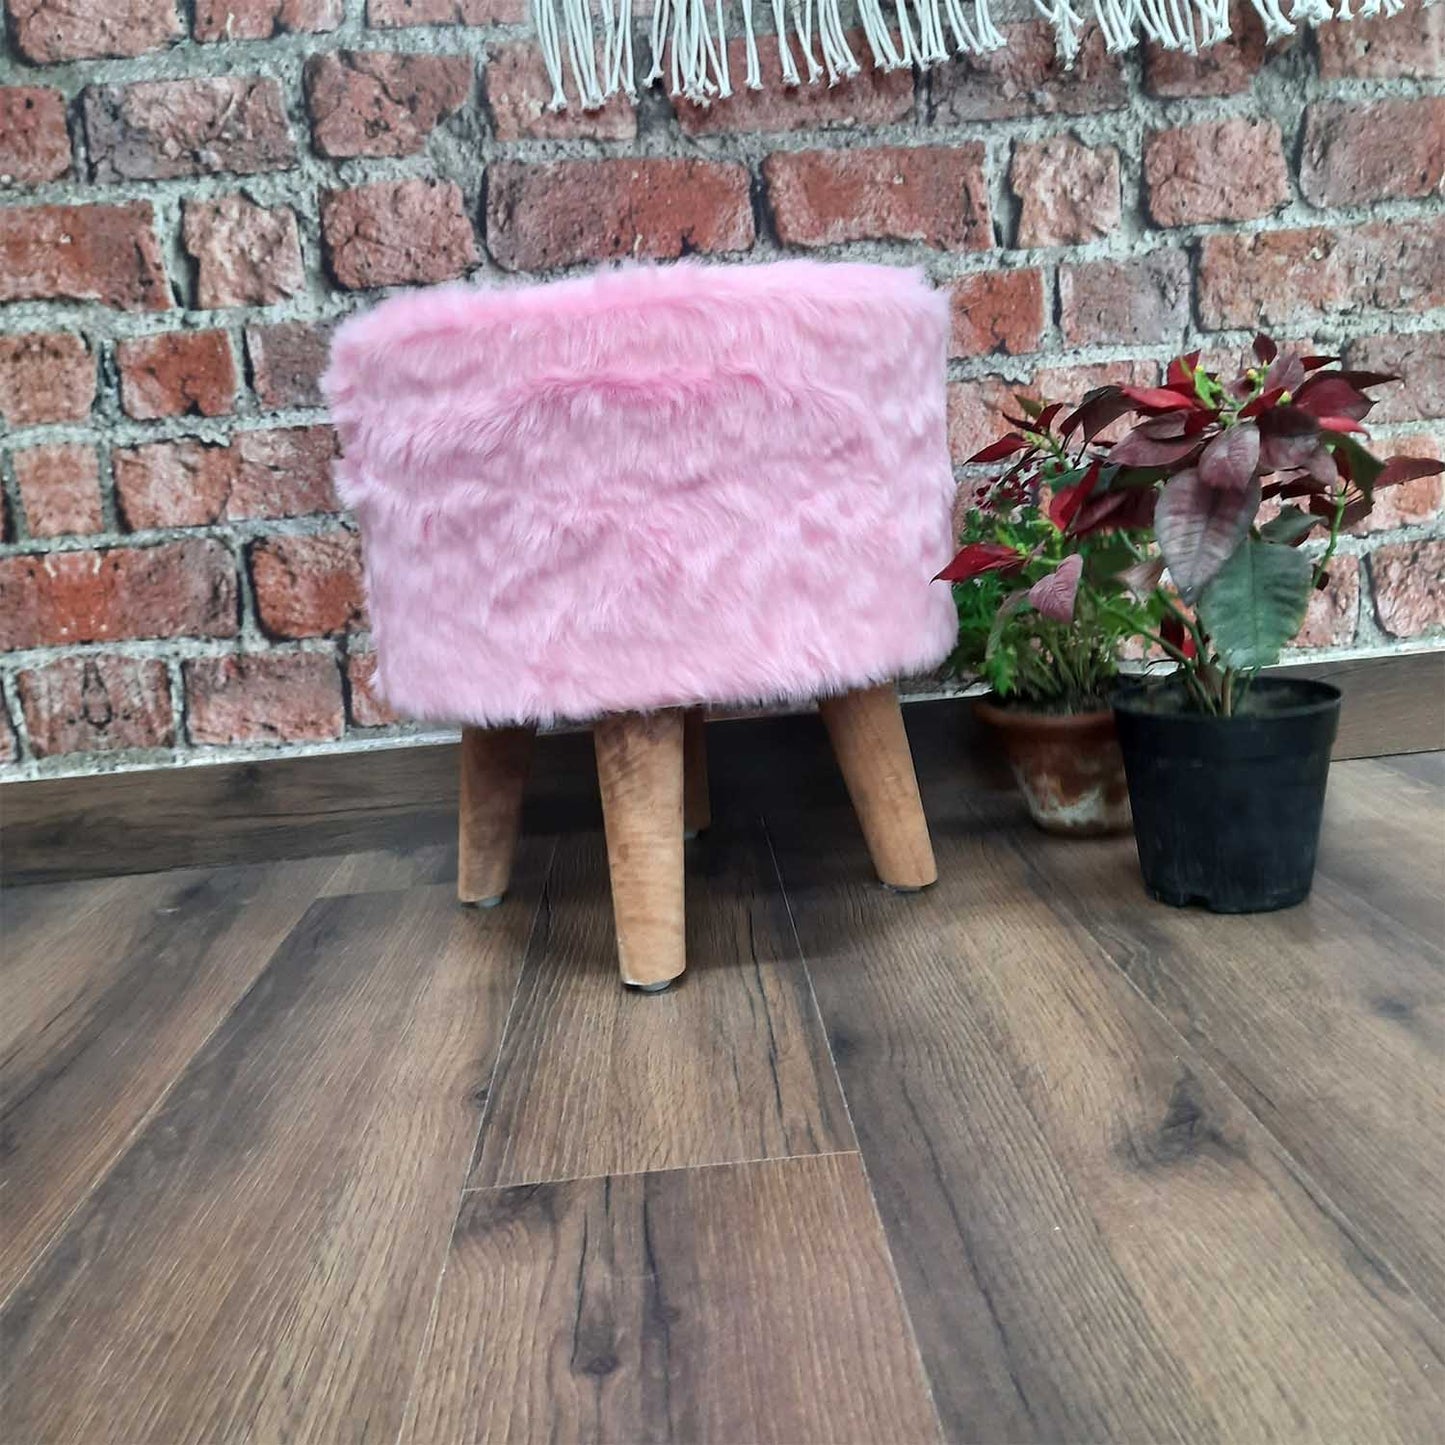 BIGMO Luxury Long Pink Fur Stool/ Ottoman (4 Legs for added stability-Natural Finish )